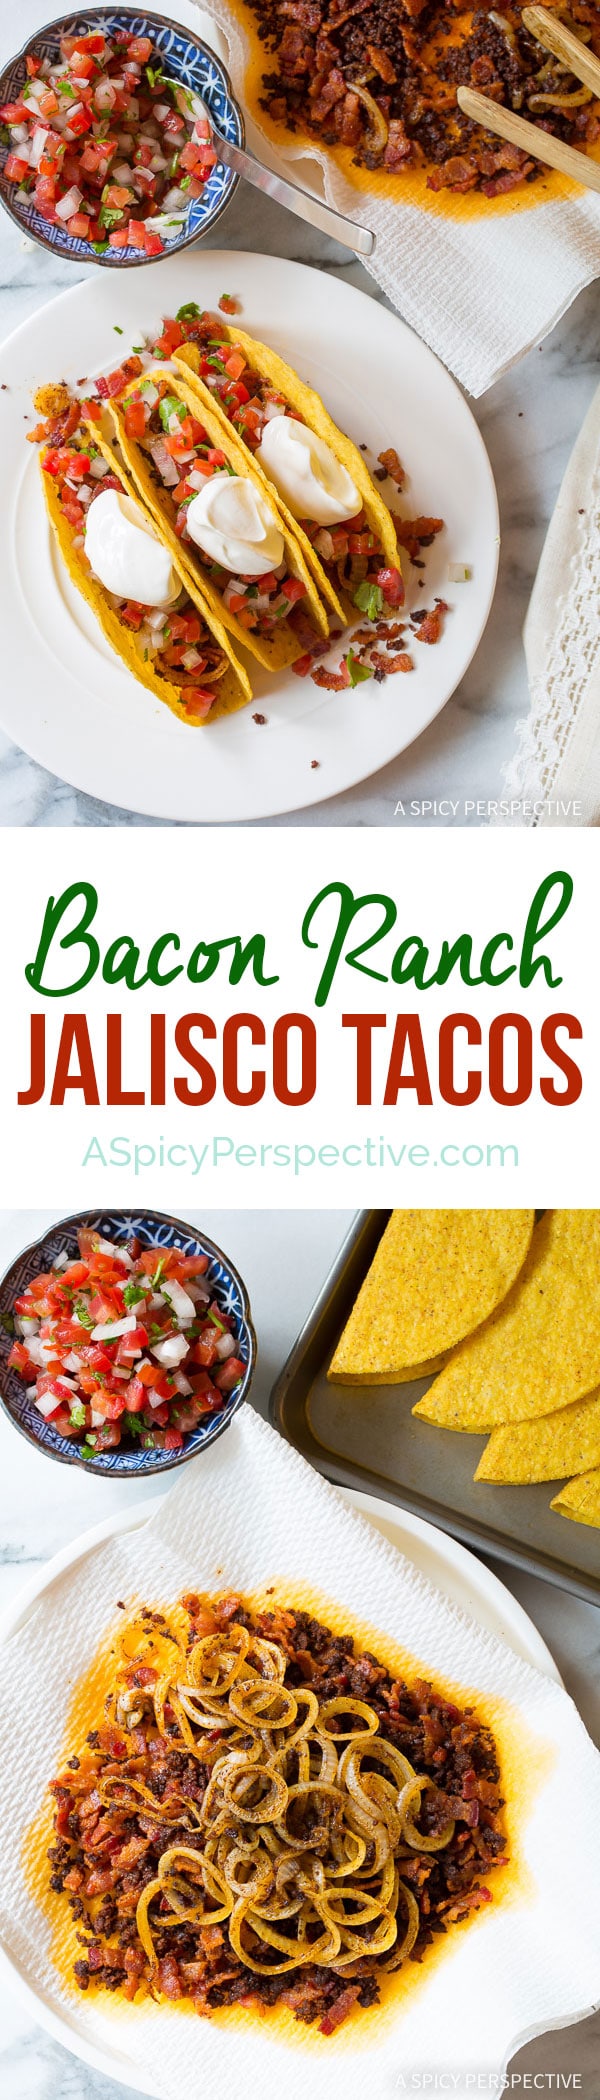 Easy to Make Bacon Ranch Jalisco Tacos Recipe on ASpicyPerspective.com